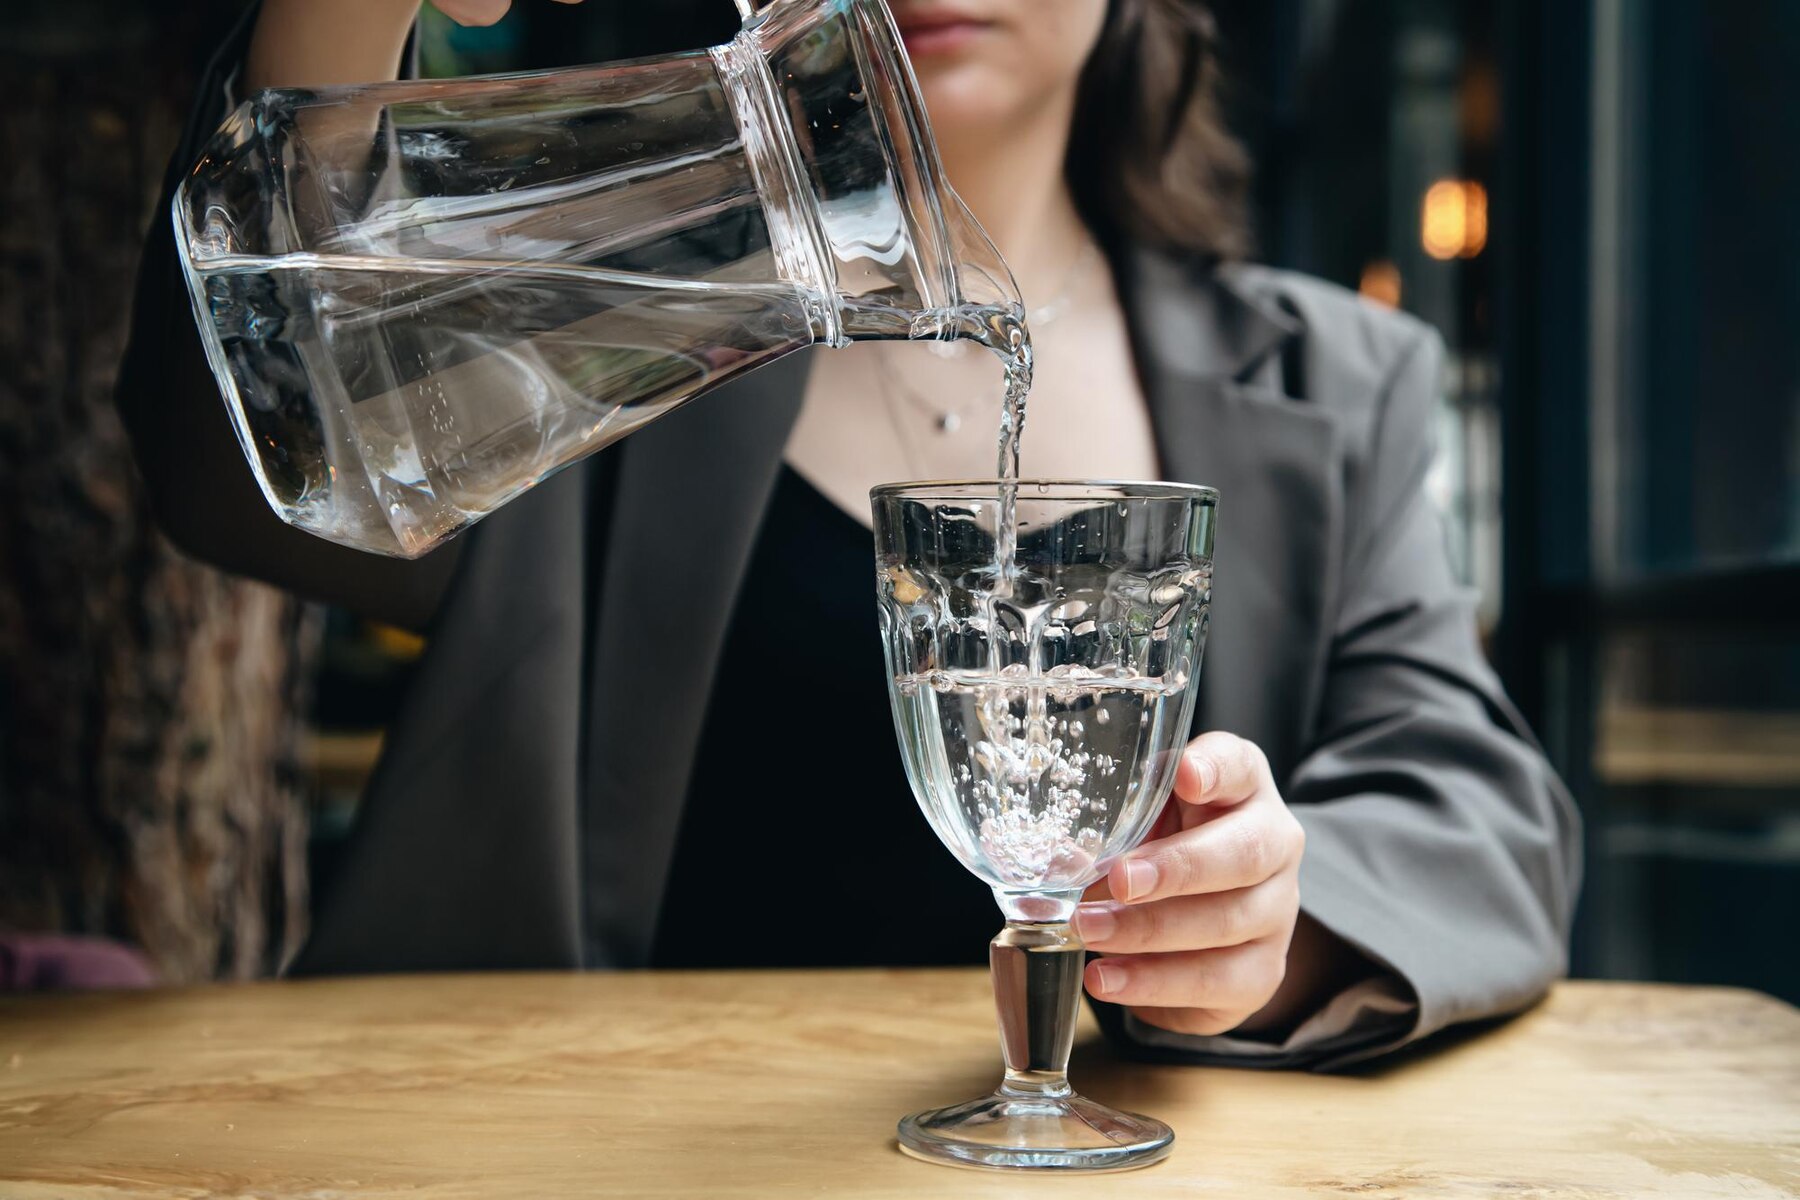 closeup-a-woman-pours-water-into-a-glass-in-a-cafe_169016-21808.jpg